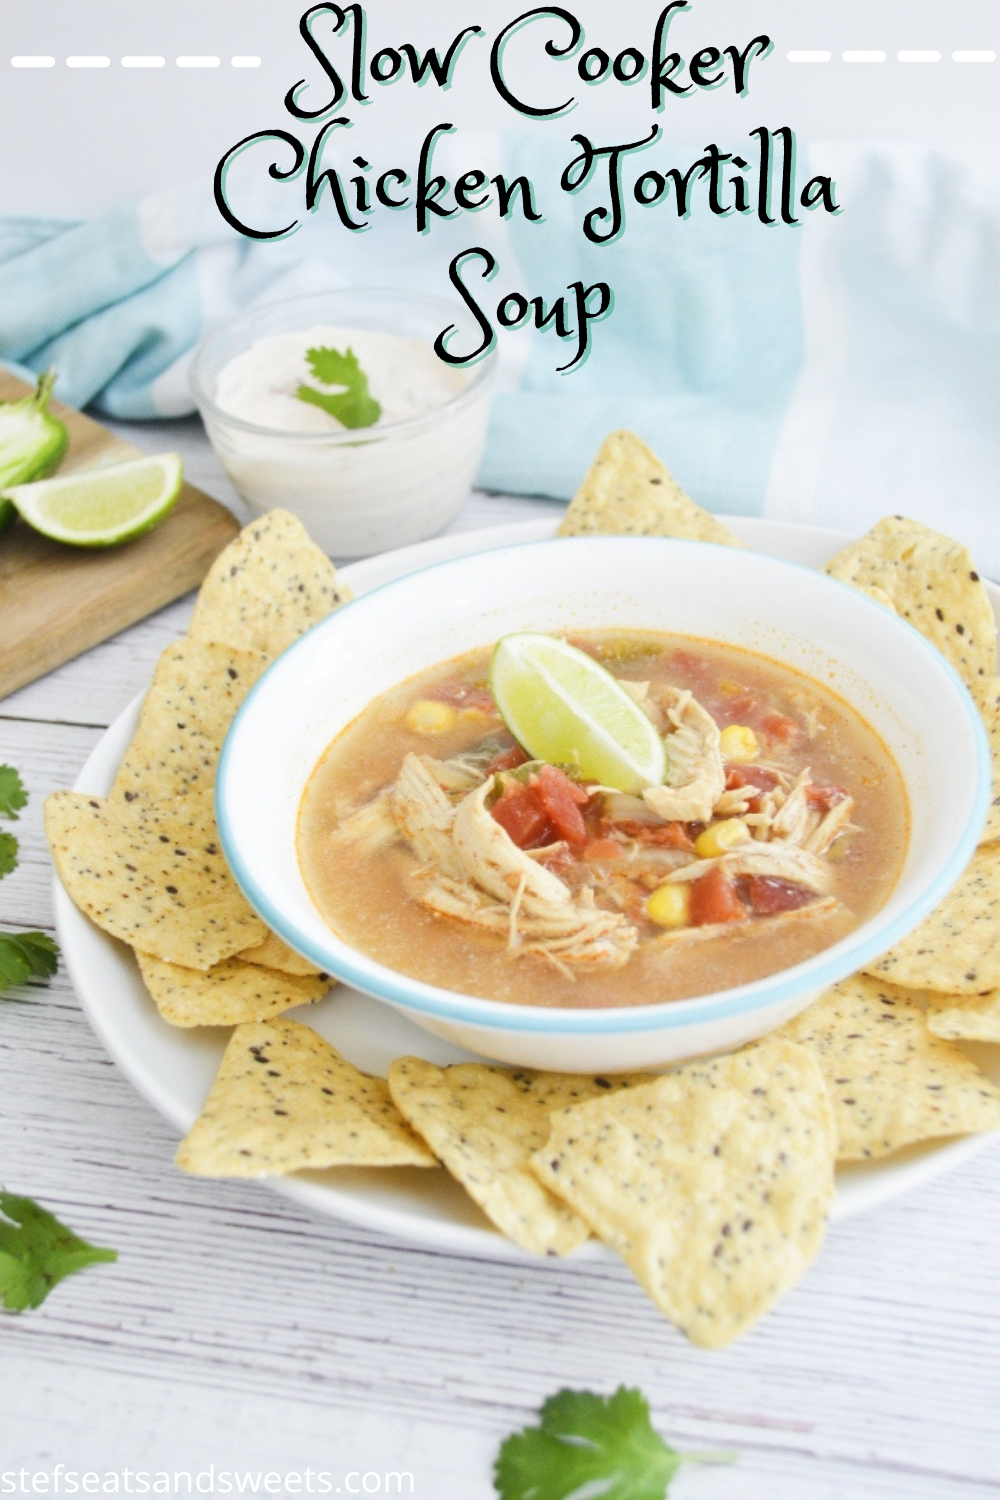 Spicy Chicken Tortilla Soup Pinterest Image with Text